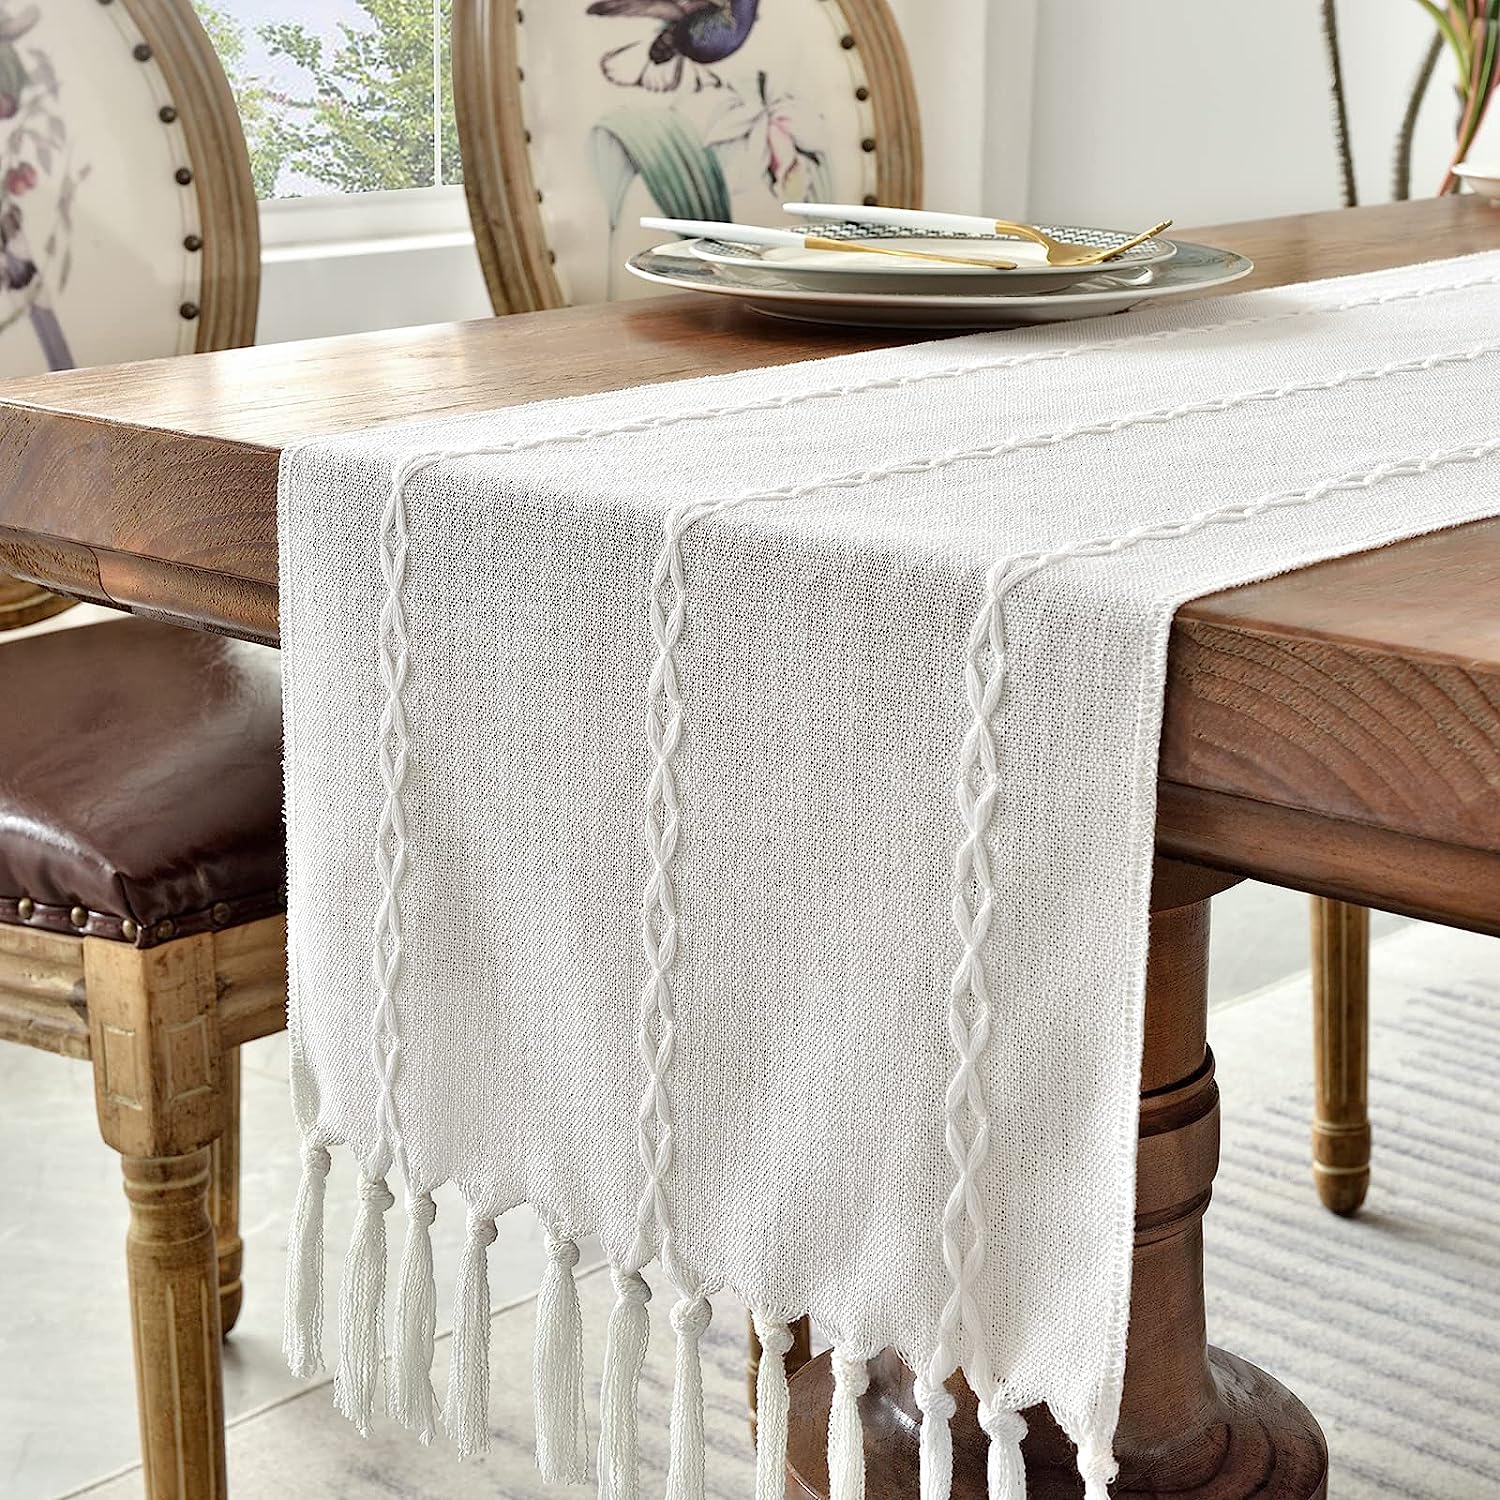 Wracra Cotton Linen Table Runner Farmhouse Style White Table Runner 180cm with Hand-tassels for Party, Dining Room Decorations Dessert Table Decor(White, 180cm) 7